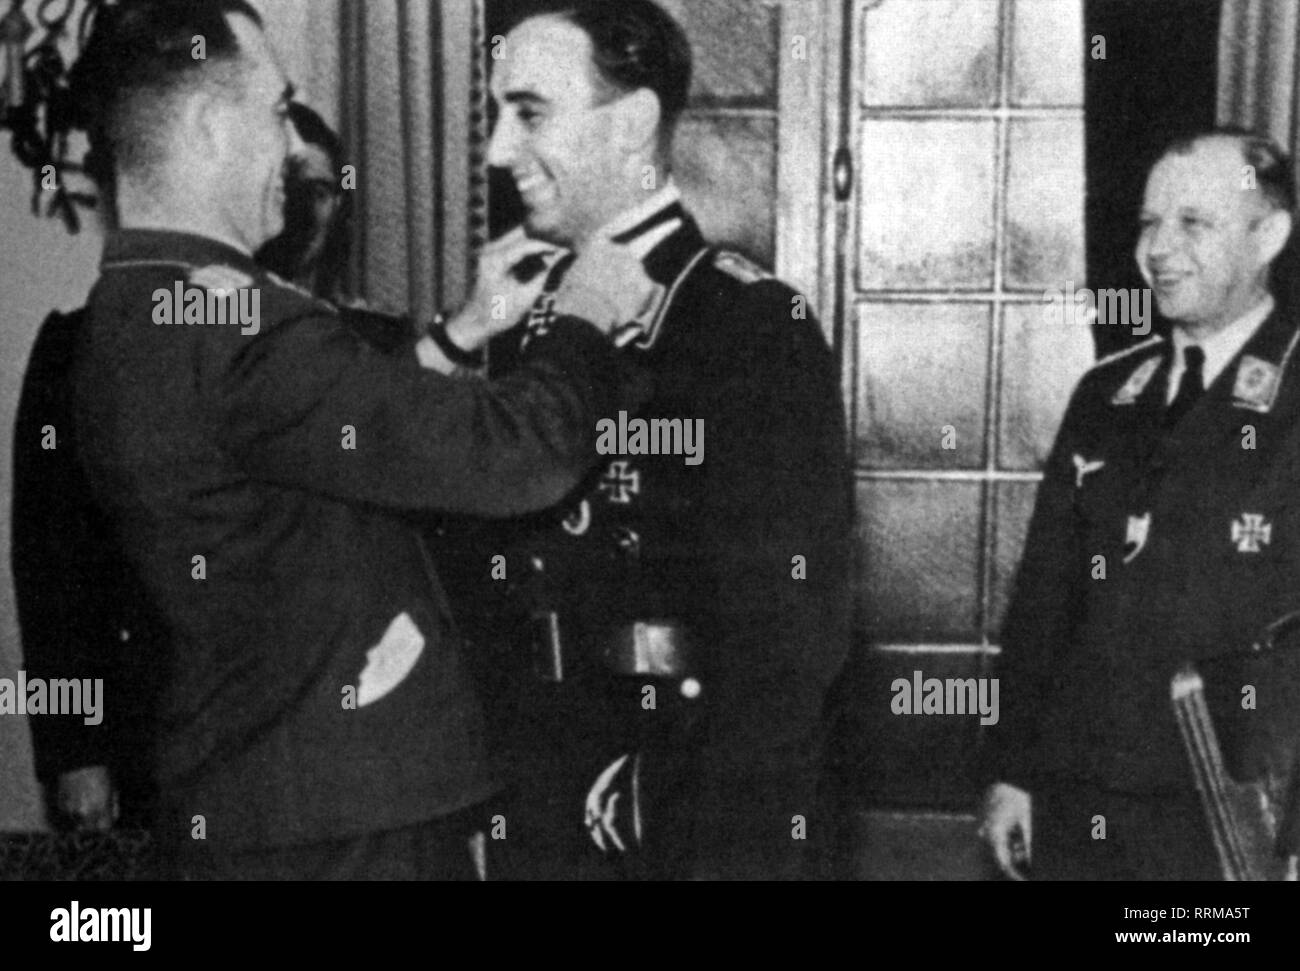 Schnaufer, Heinz-Wolfgang, 16.2.1922 - 15.7.1950, German air force officer, half length, with Major-General Josef Schmid, receiving the Knight's Cross, 3.1.1944, Additional-Rights-Clearance-Info-Not-Available Stock Photo